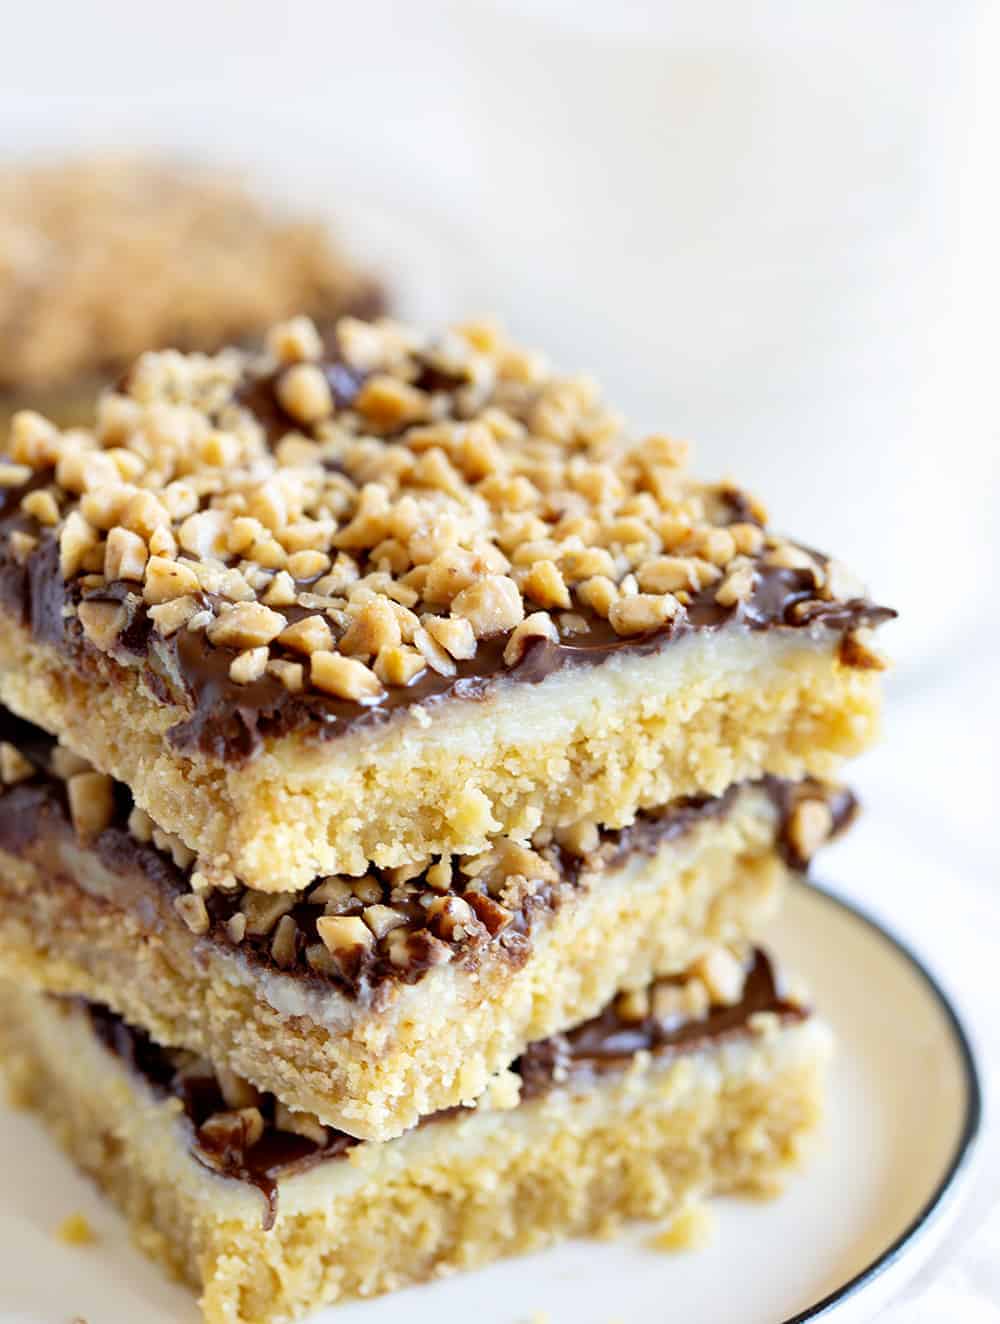 Chocolate Toffee Bars Stacked